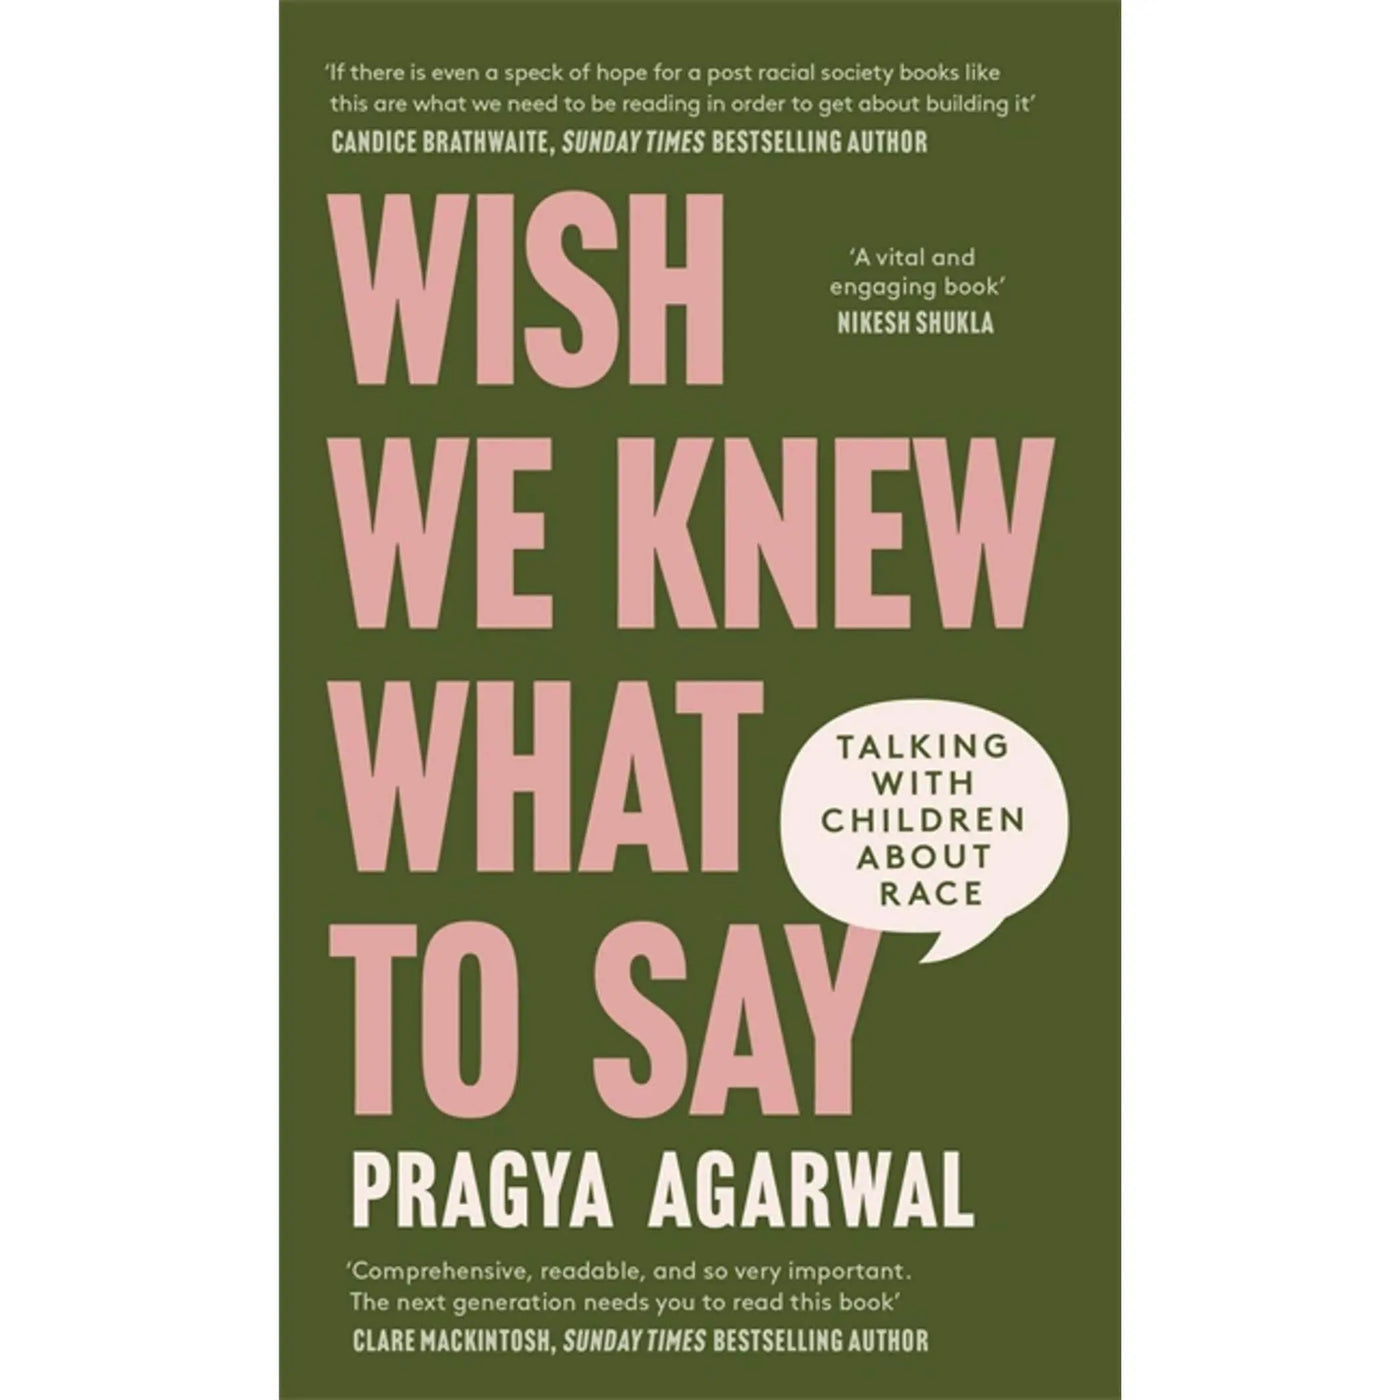 Pragya Agarwal: Wish We Knew What to Say: Talking with Children About Race - Migration Museum Shop